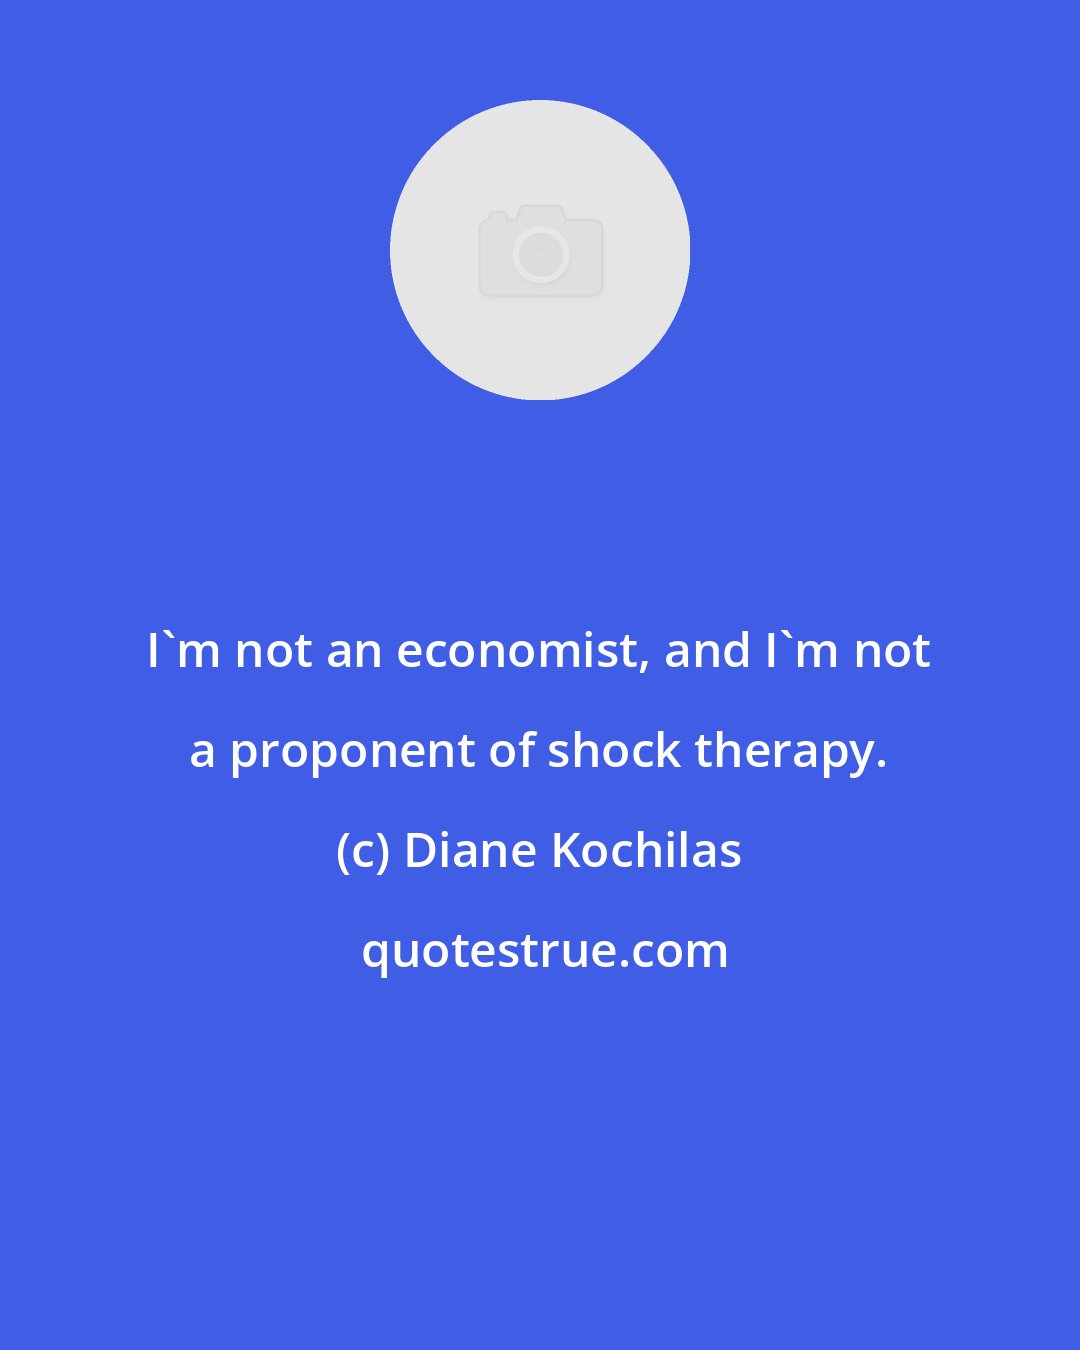 Diane Kochilas: I'm not an economist, and I'm not a proponent of shock therapy.